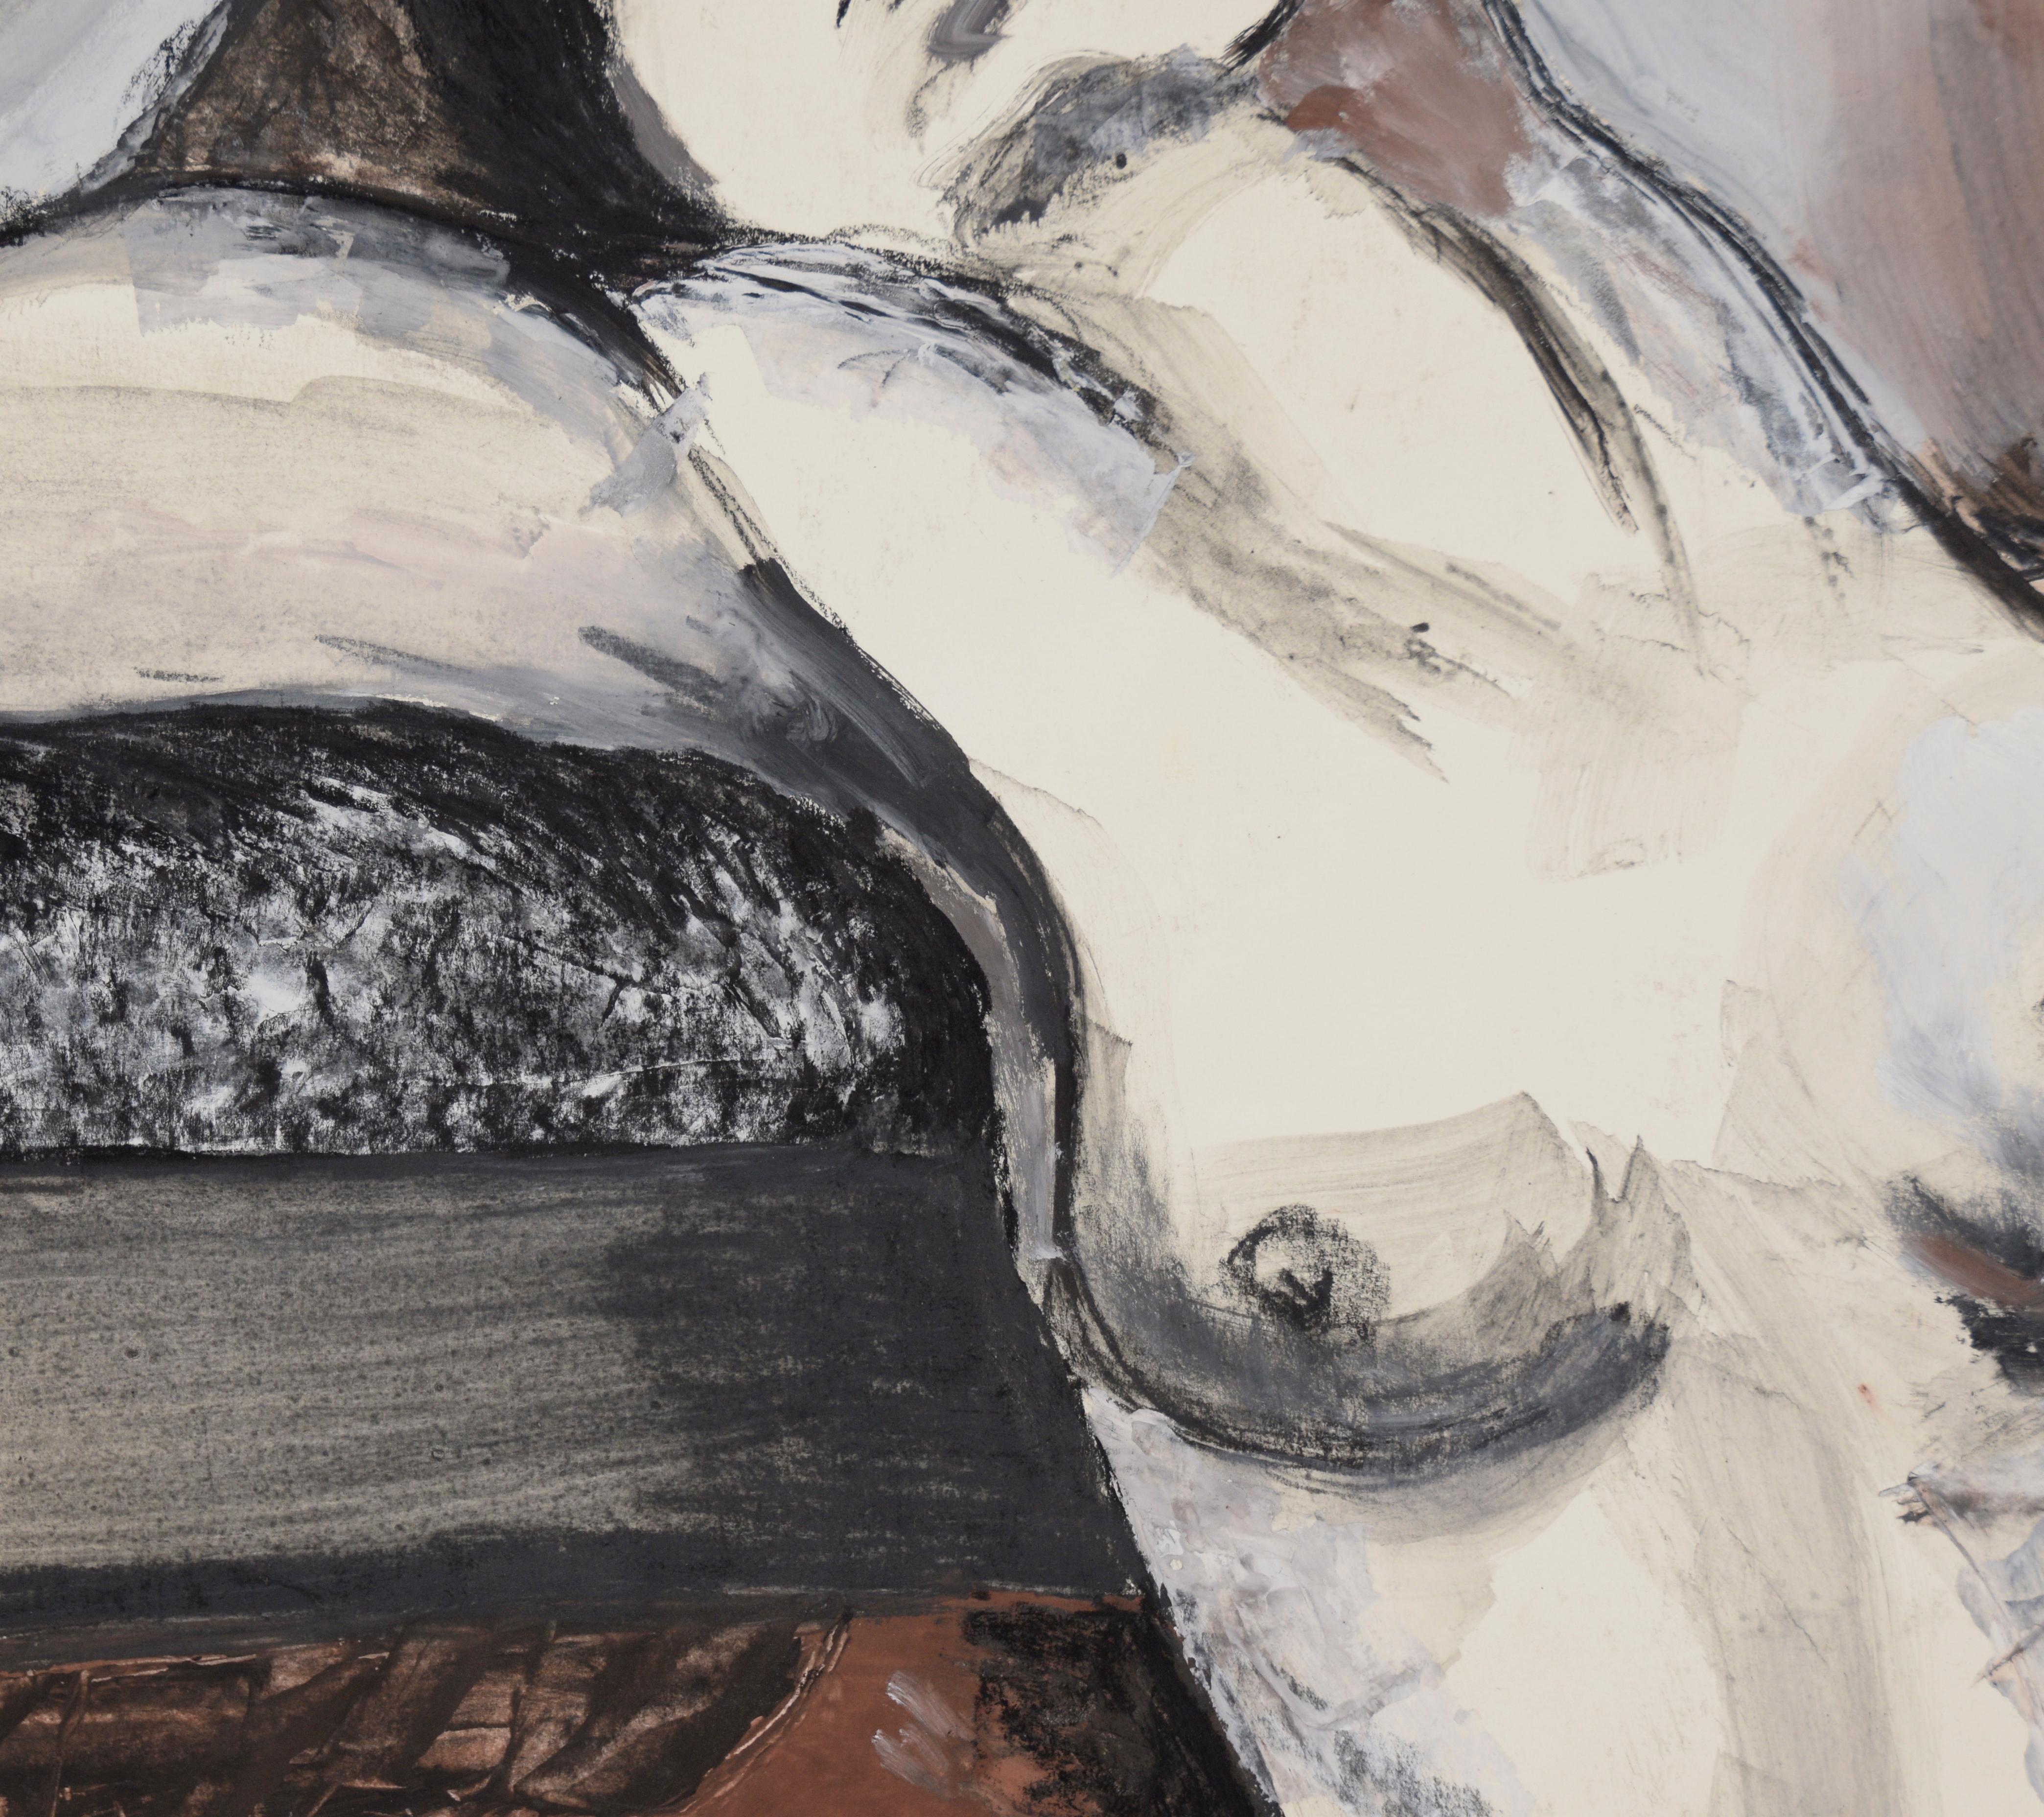 Black and White Nude Woman in Acrylic, Gouache, and Charcoal on Paper - Contemporary Painting by Katherine Kallick